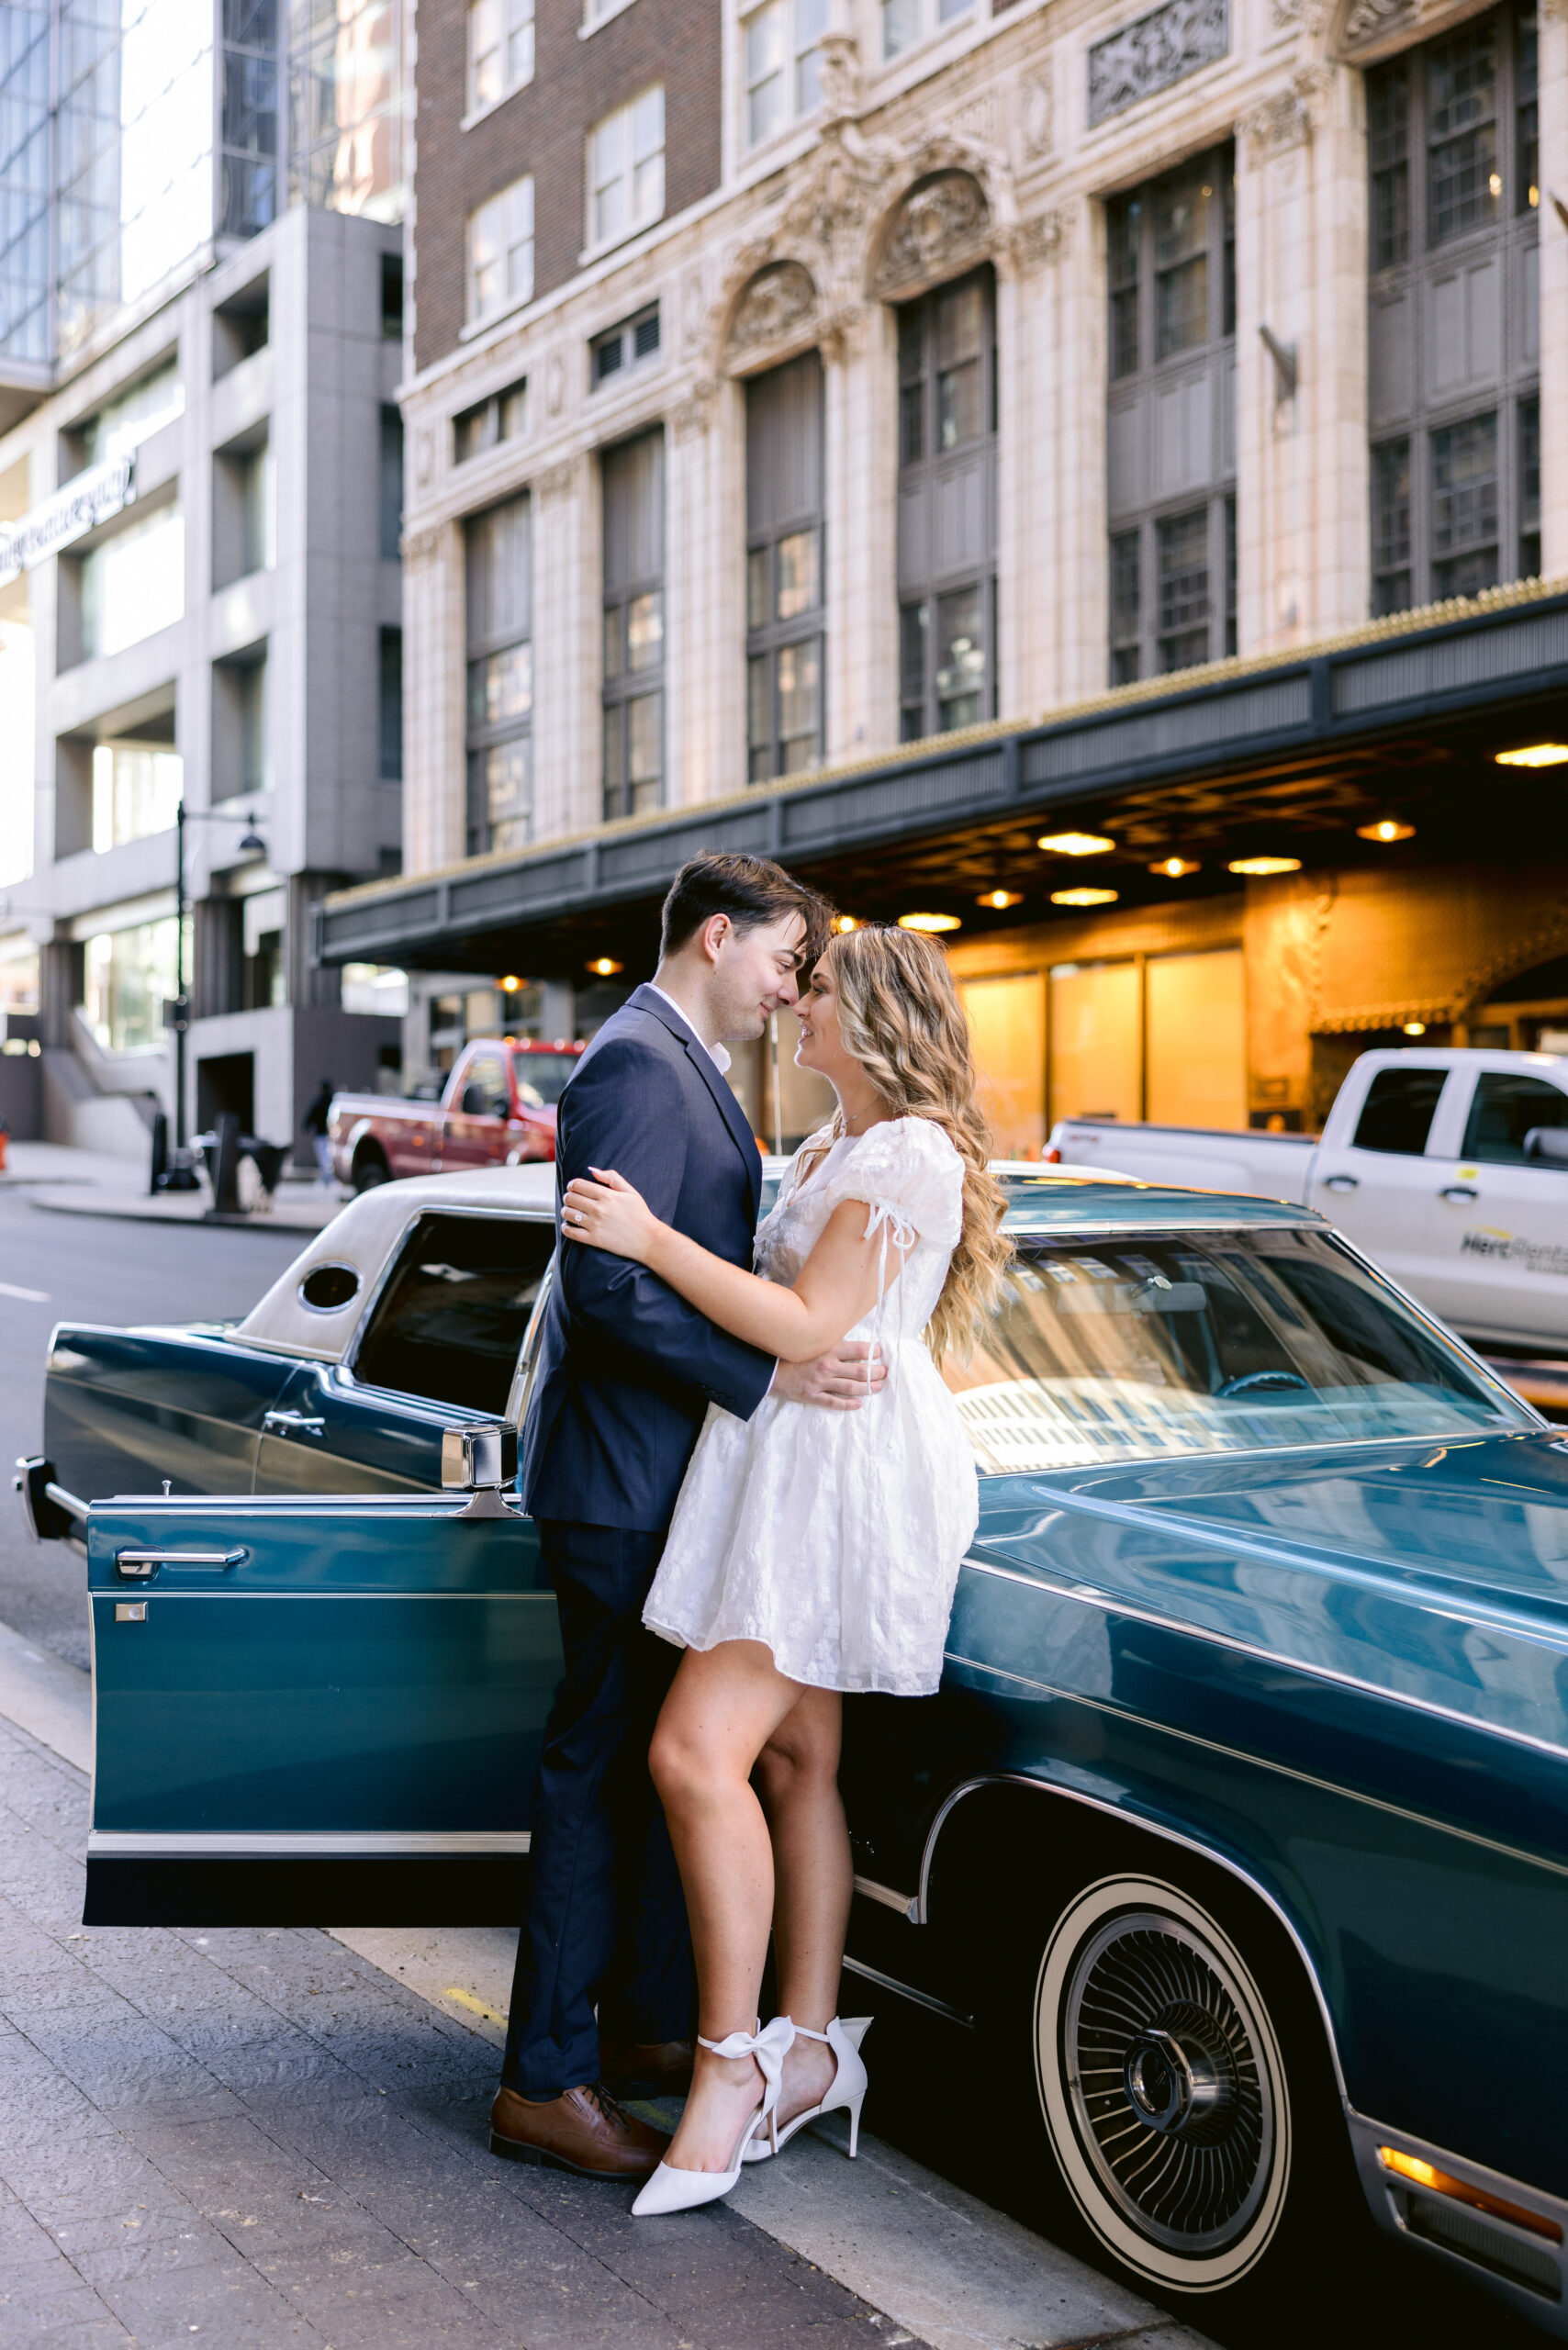 bride and groom with a vintage car, looking at each other in an intimate way